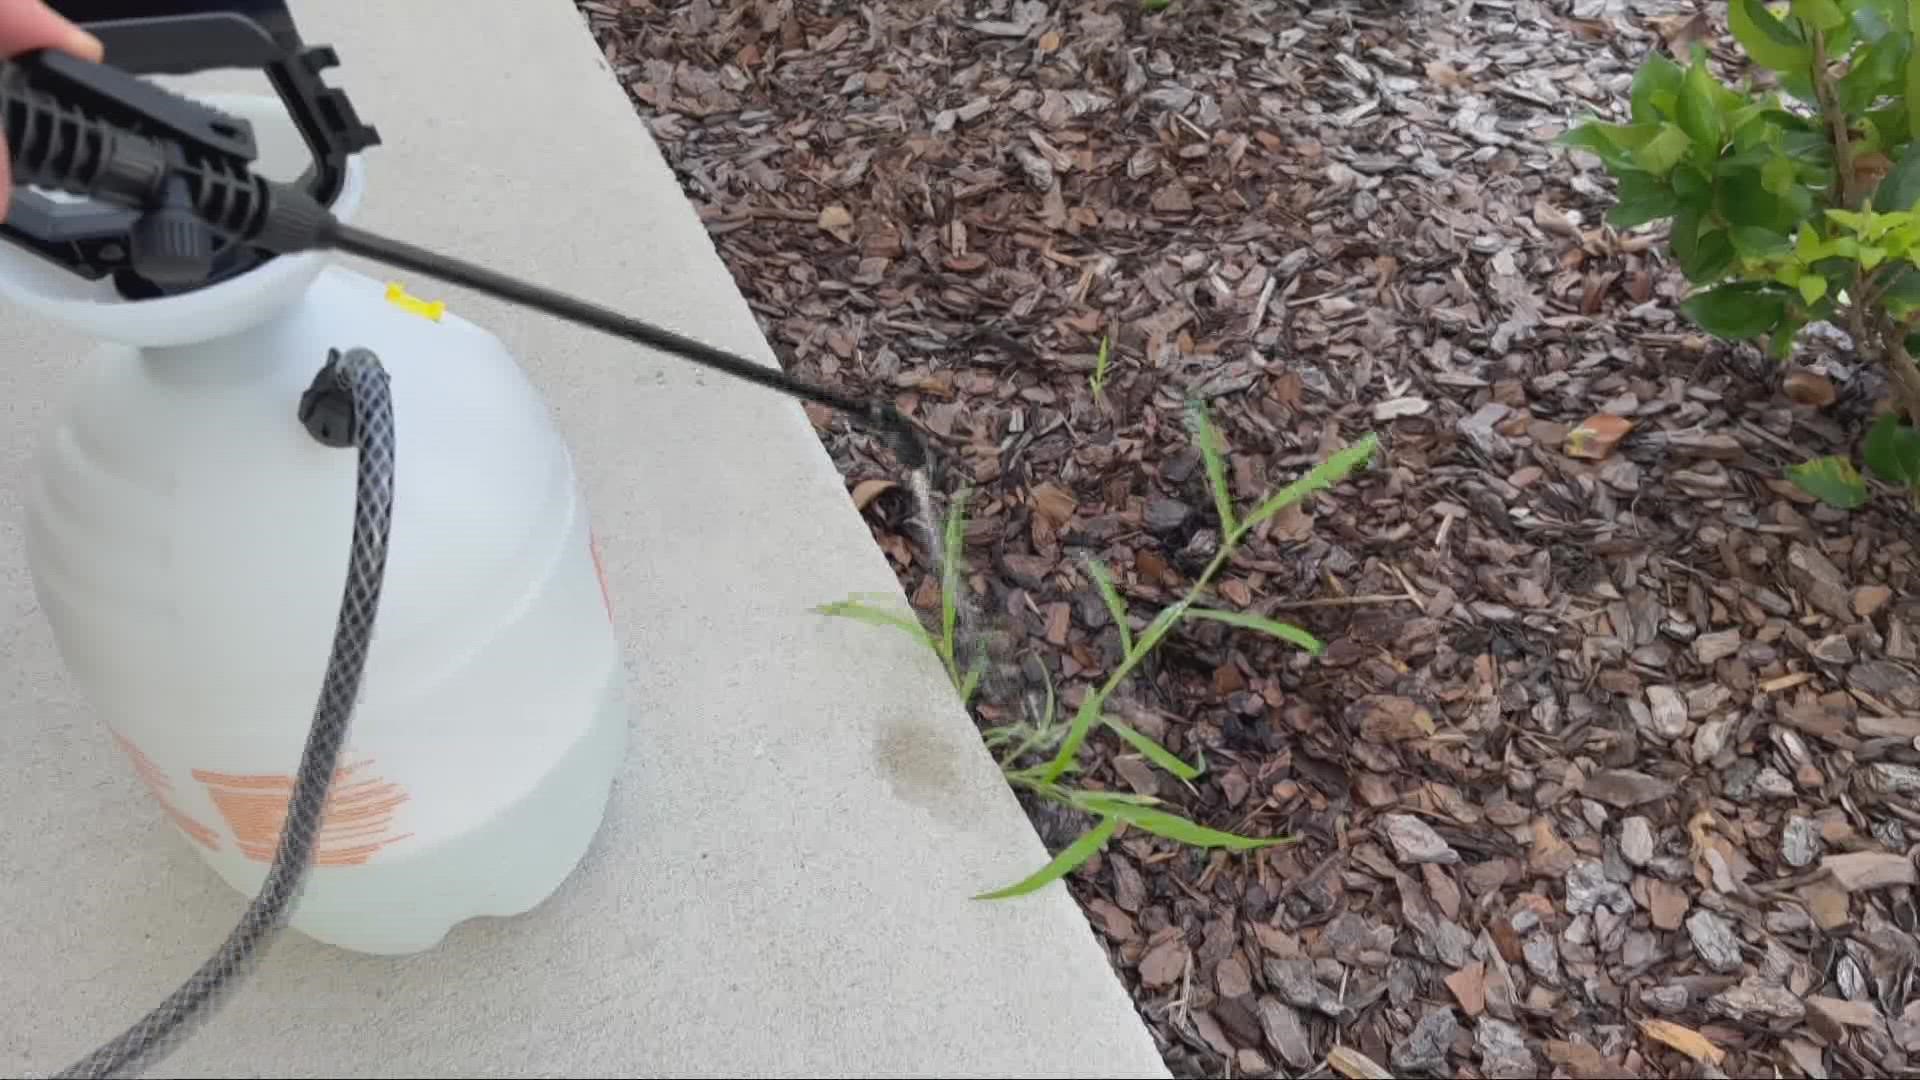 ABC10's Megan Evans shows how to save money and your yard by making a non-toxic weed killer at home.